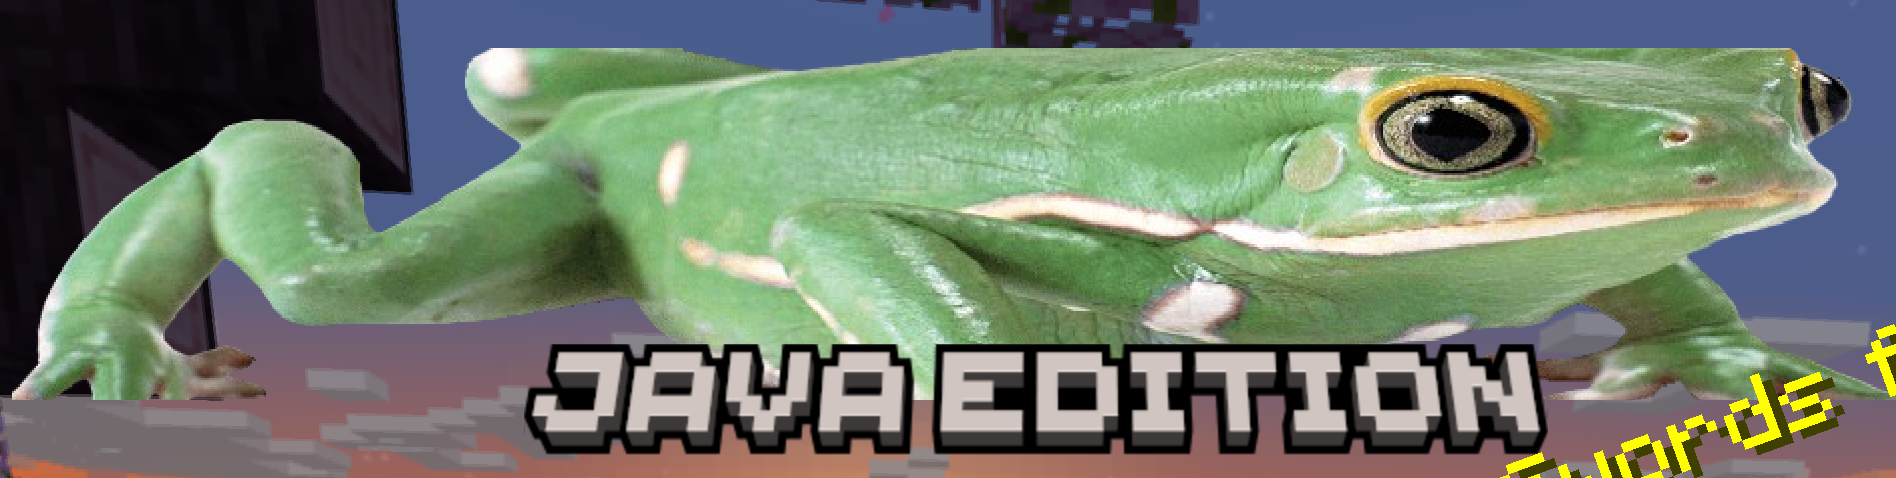 the Minecraft logo fully replaced with an image of a frog